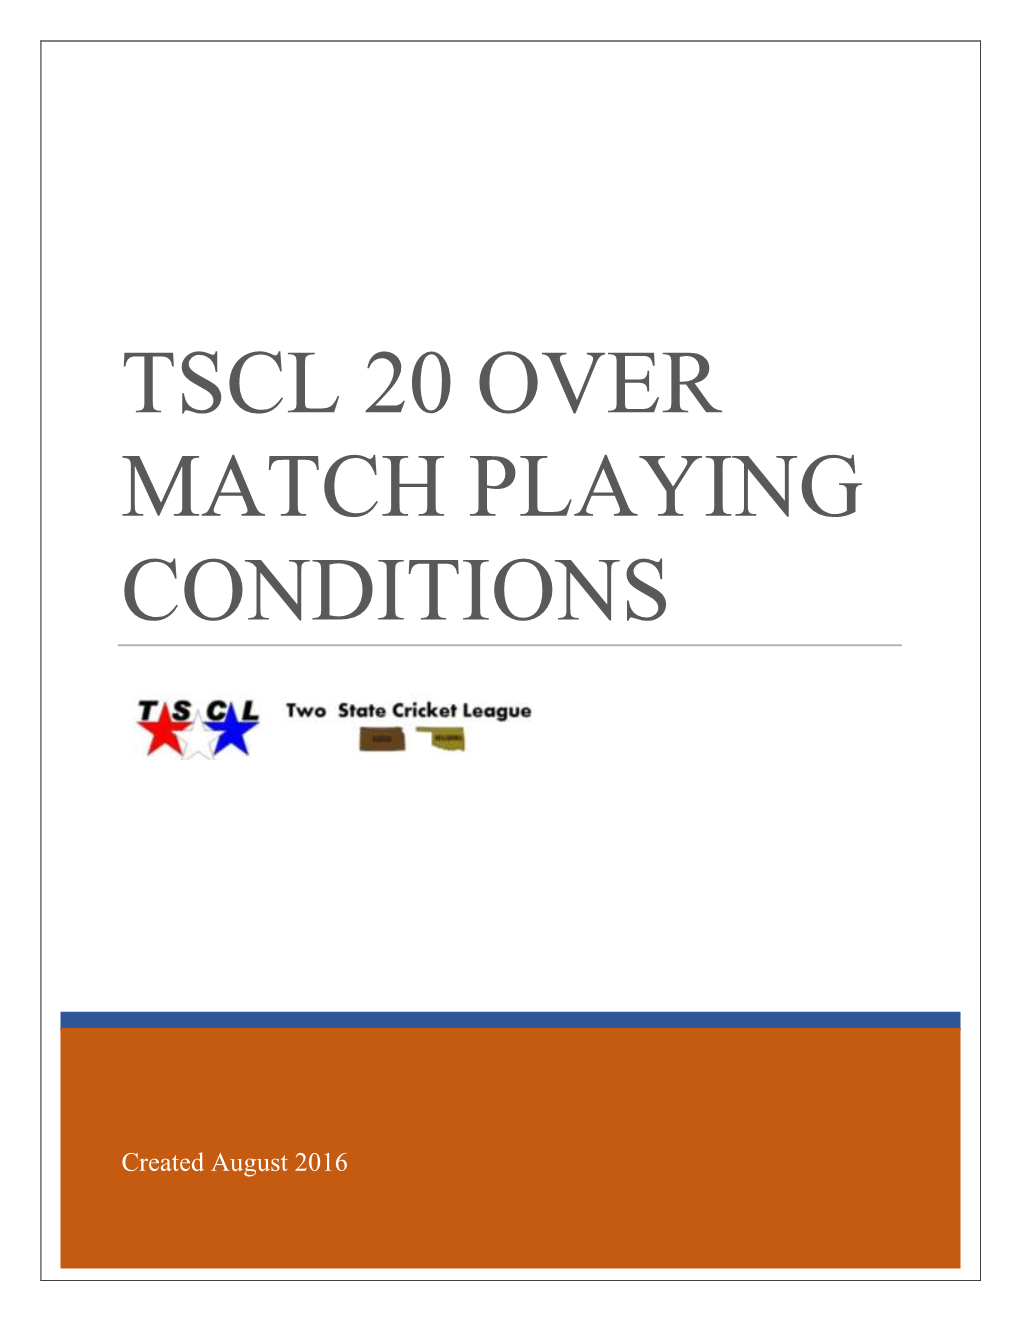 Tscl 20 Over Match Playing Conditions